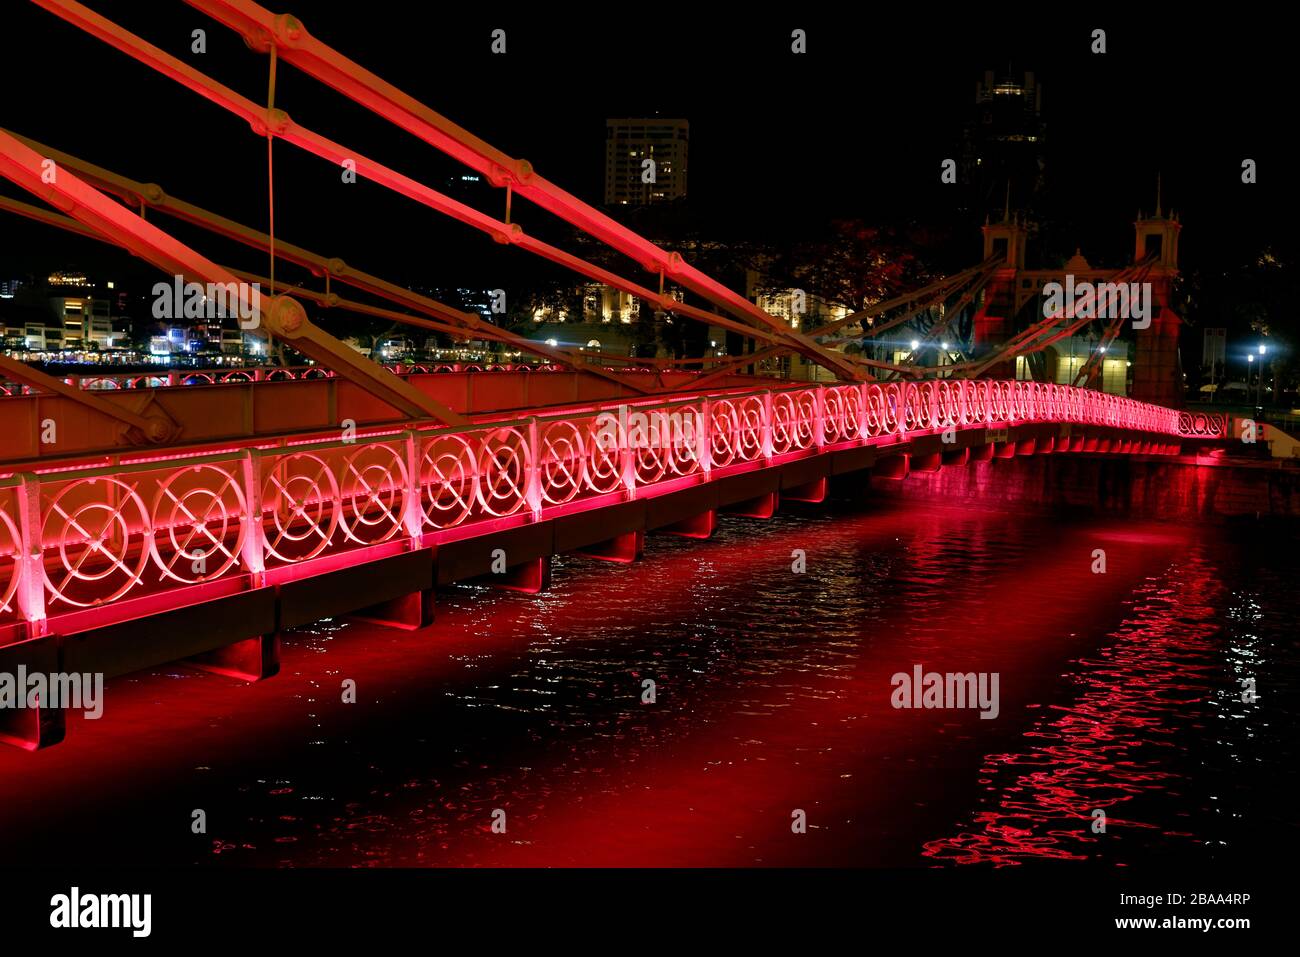 The Cavenaugh bridge, the only suspension bridge on the Singapore river, illuminated in red at night. Stock Photo